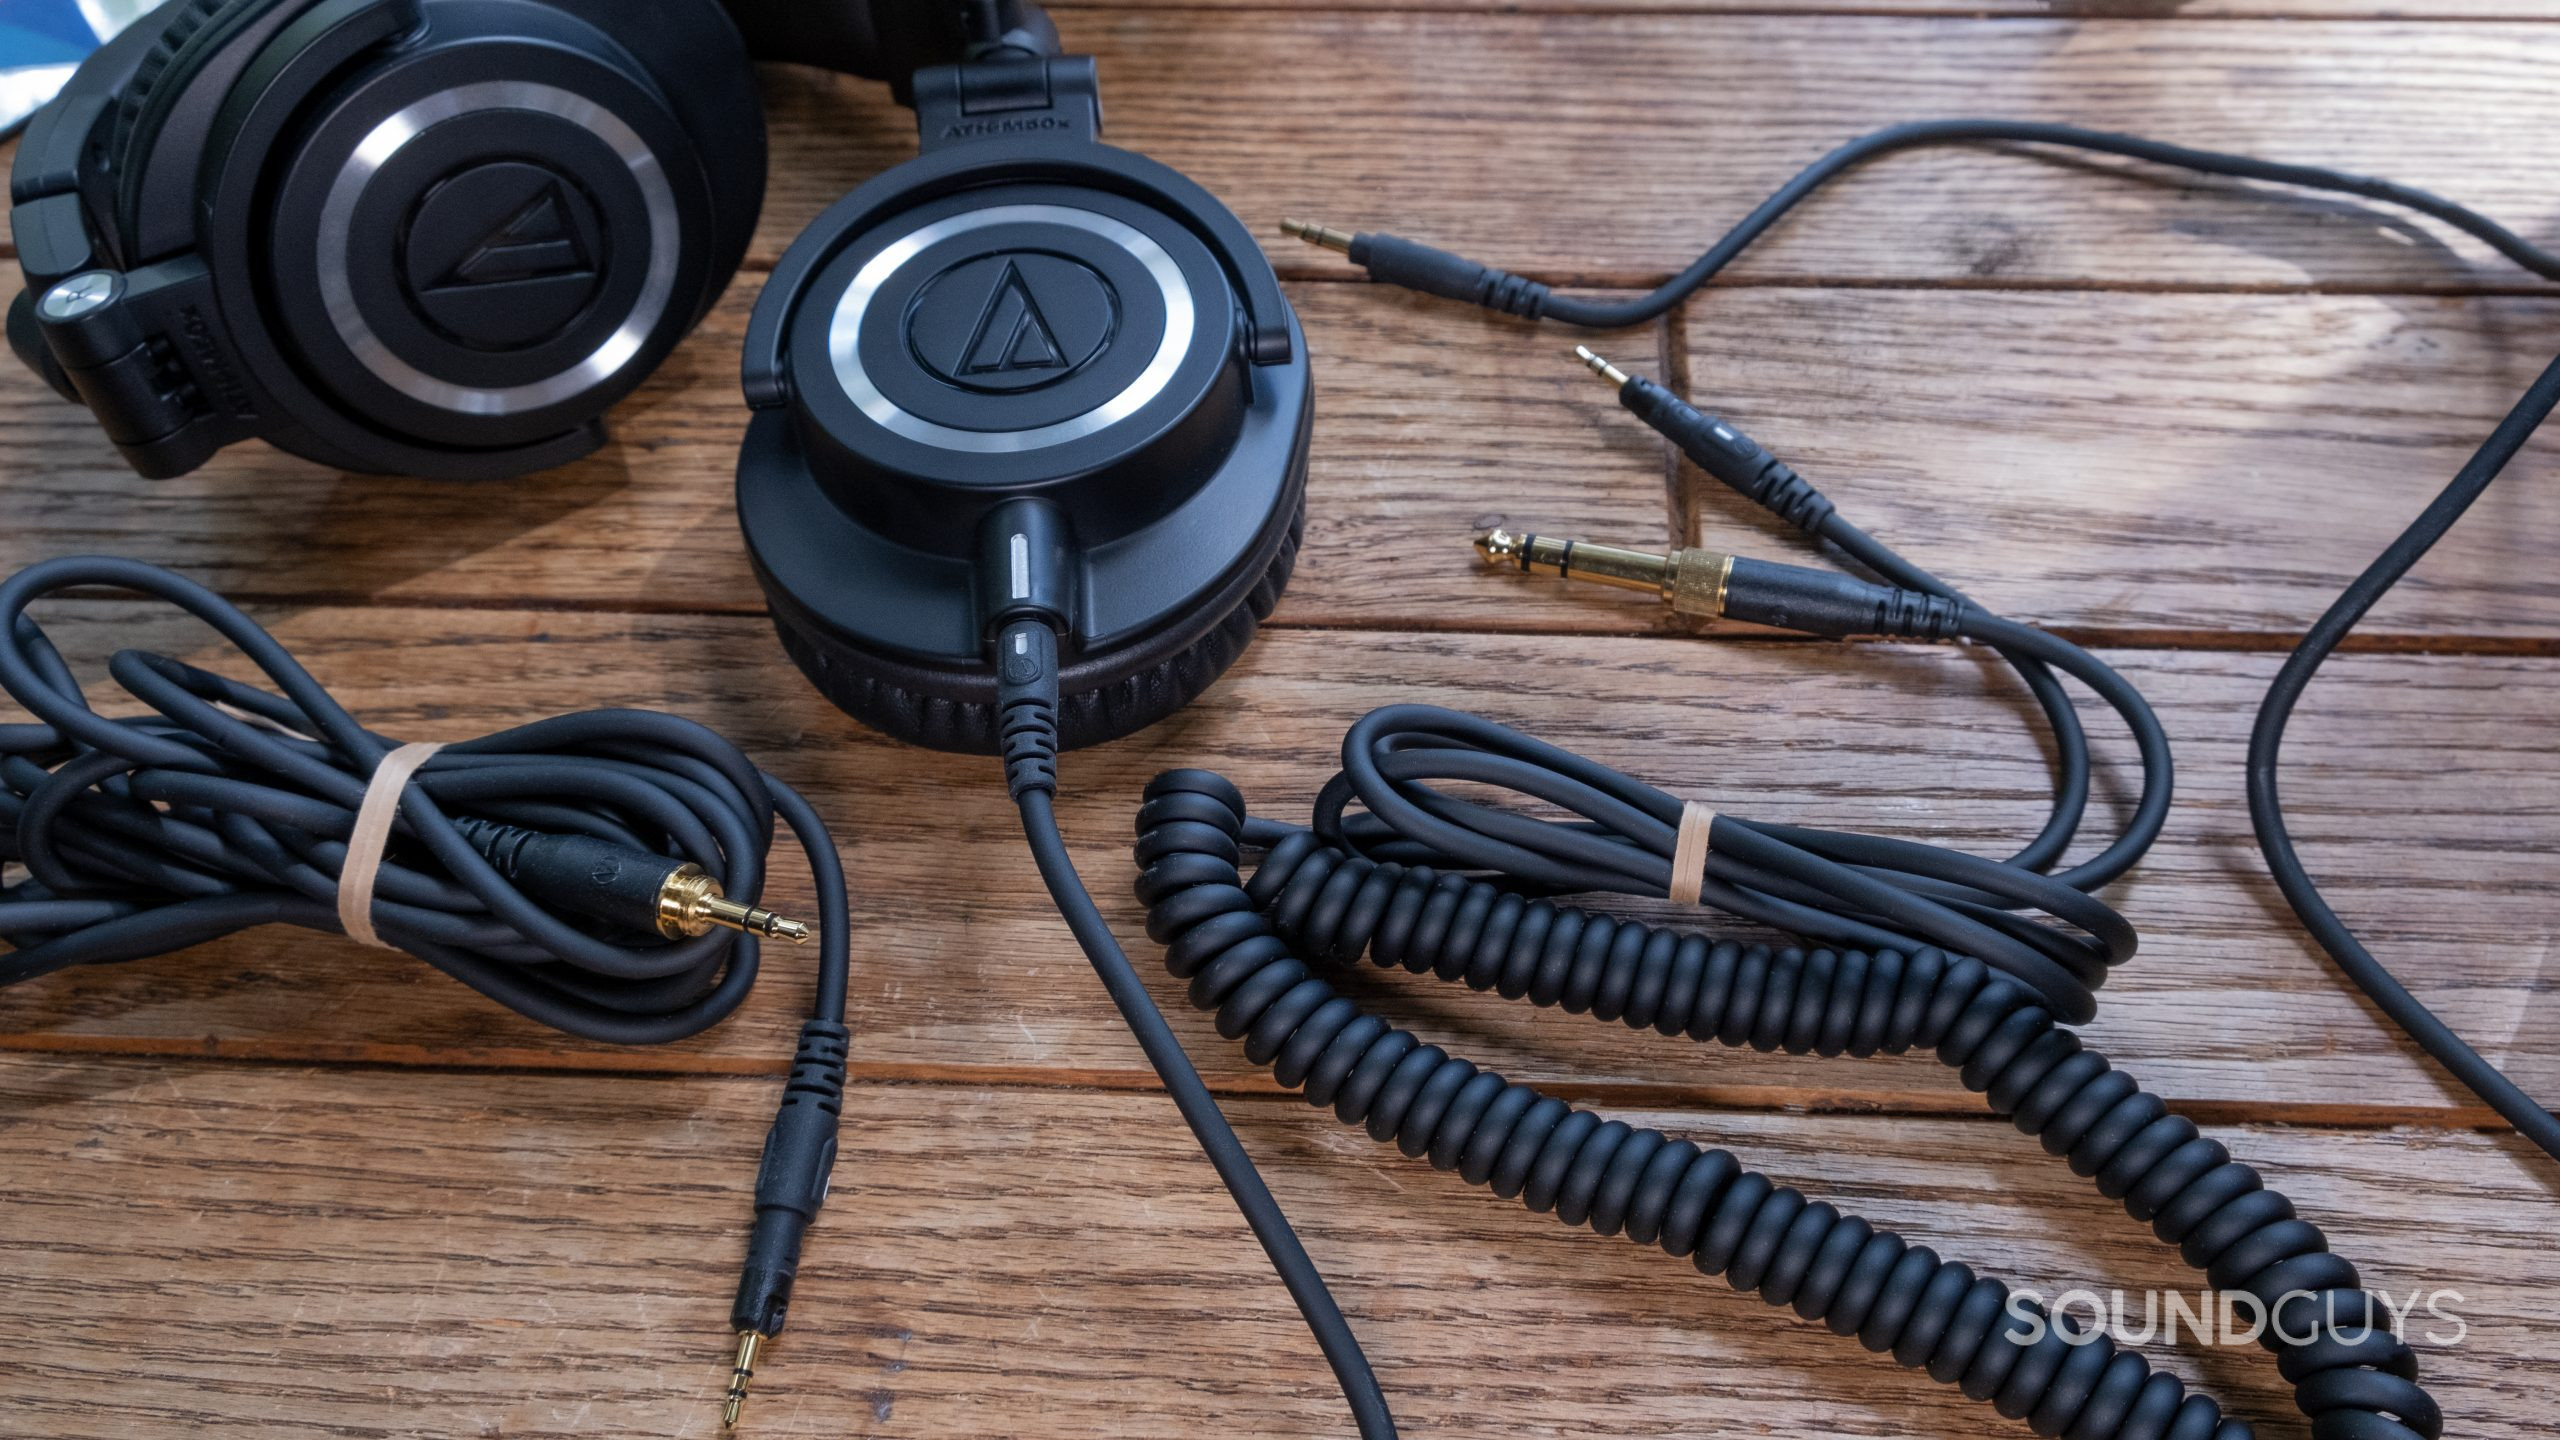 https://www.soundguys.com/wp-content/uploads/2022/03/audio-technica-ath-m50x-cables-scaled.jpg